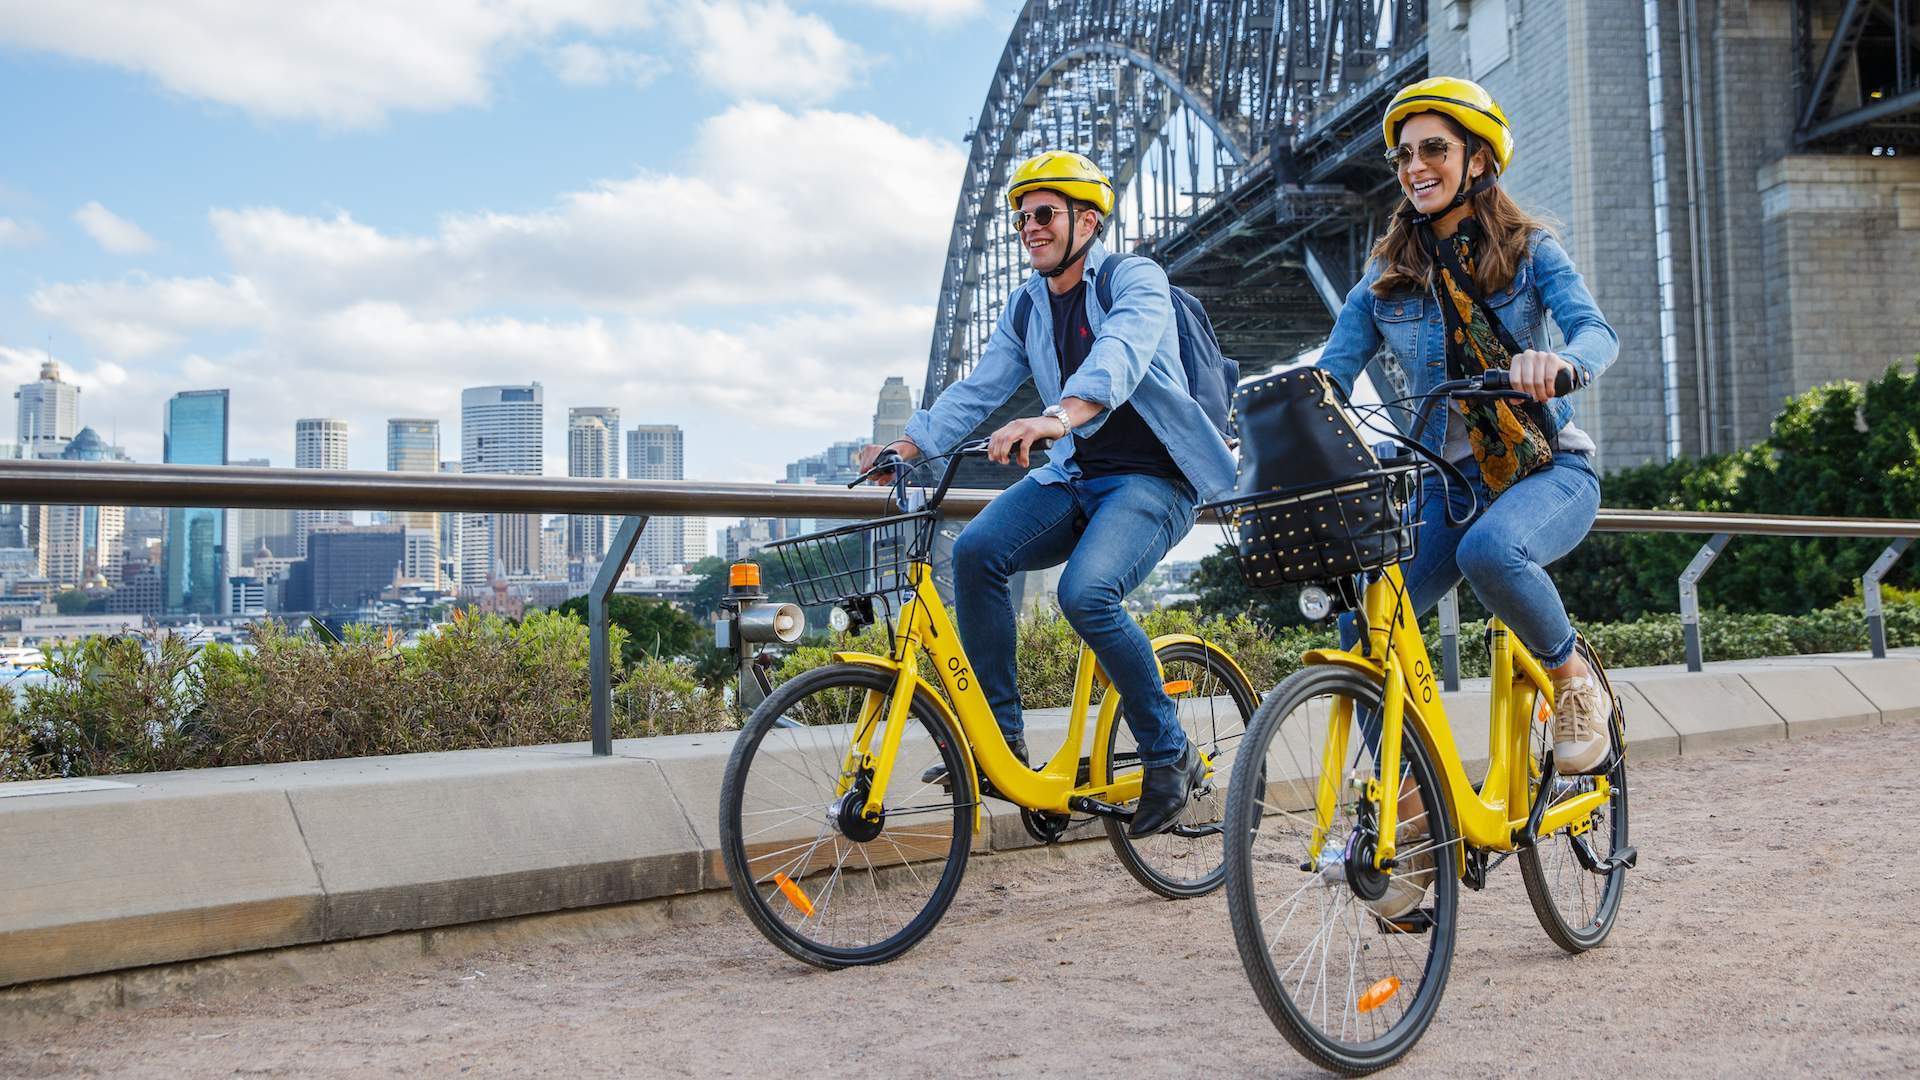 Another Dockless Bike Sharing Service Has Arrived in Sydney